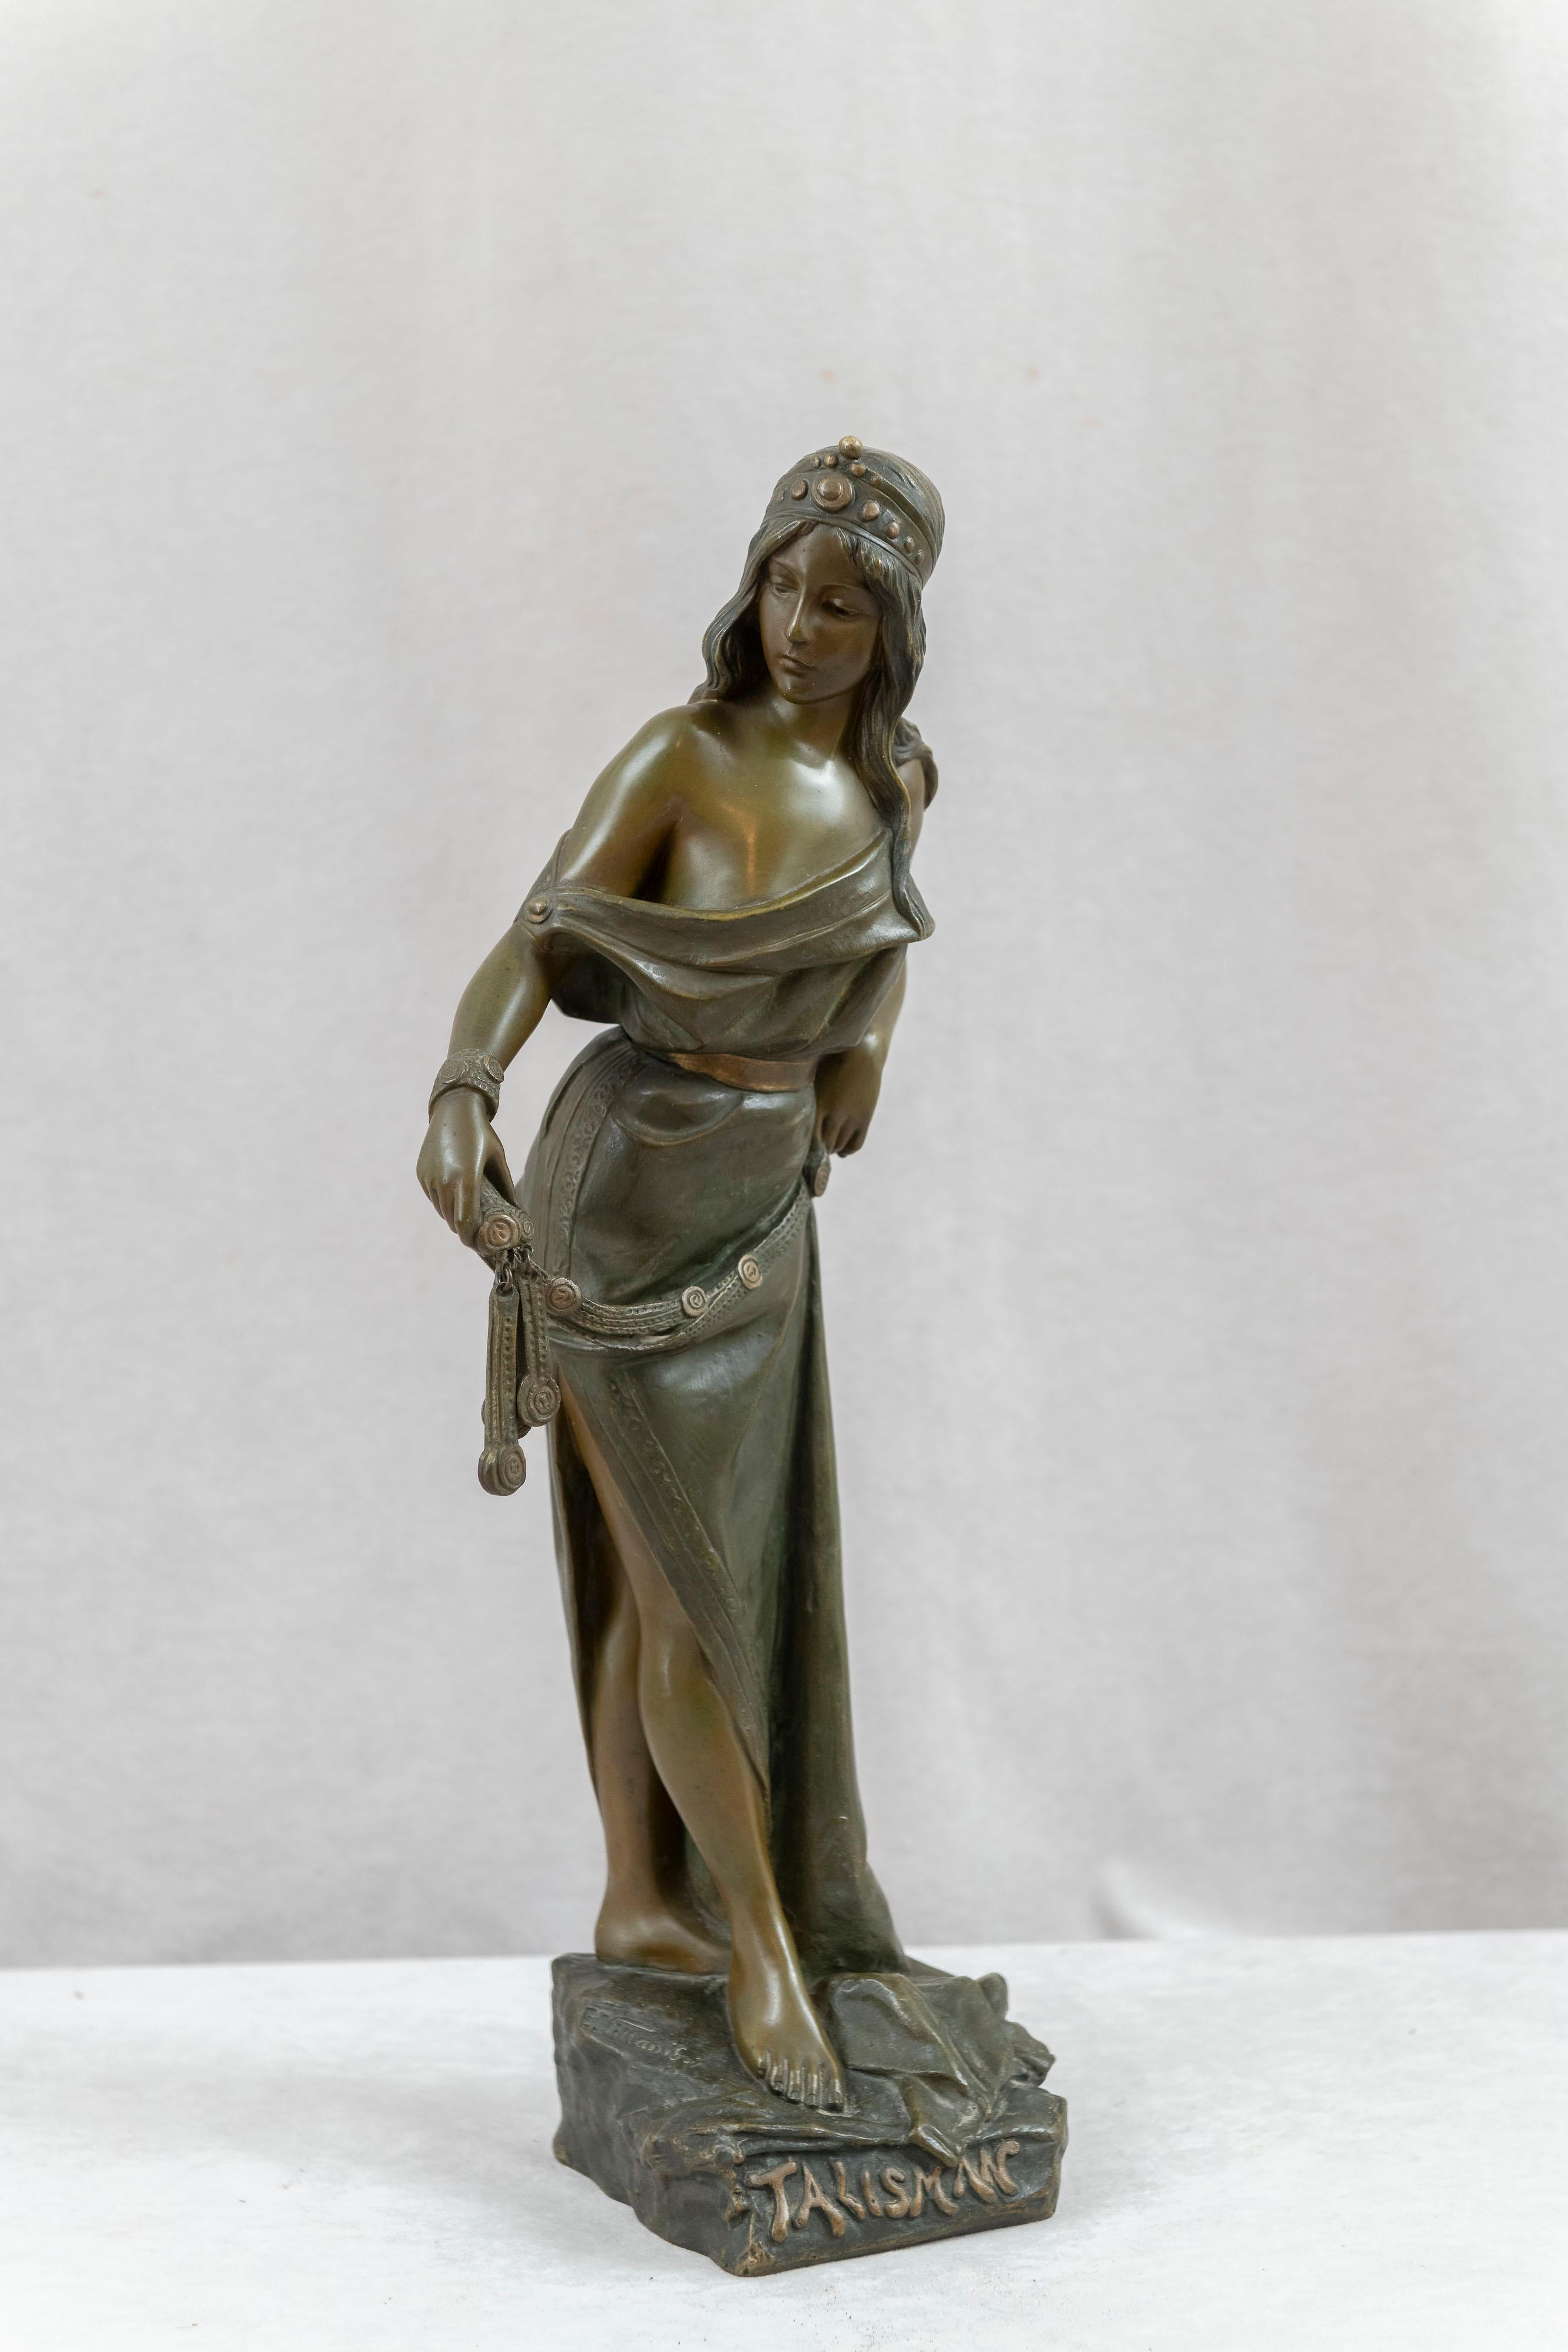  This beautiful young woman is a fine example of the creations of the noted French sculptor, Emmanuel Villanis (1858-1914). You will find his works to be predominantly art nouveau woman of which a majority were busts. The foundries he incorporated